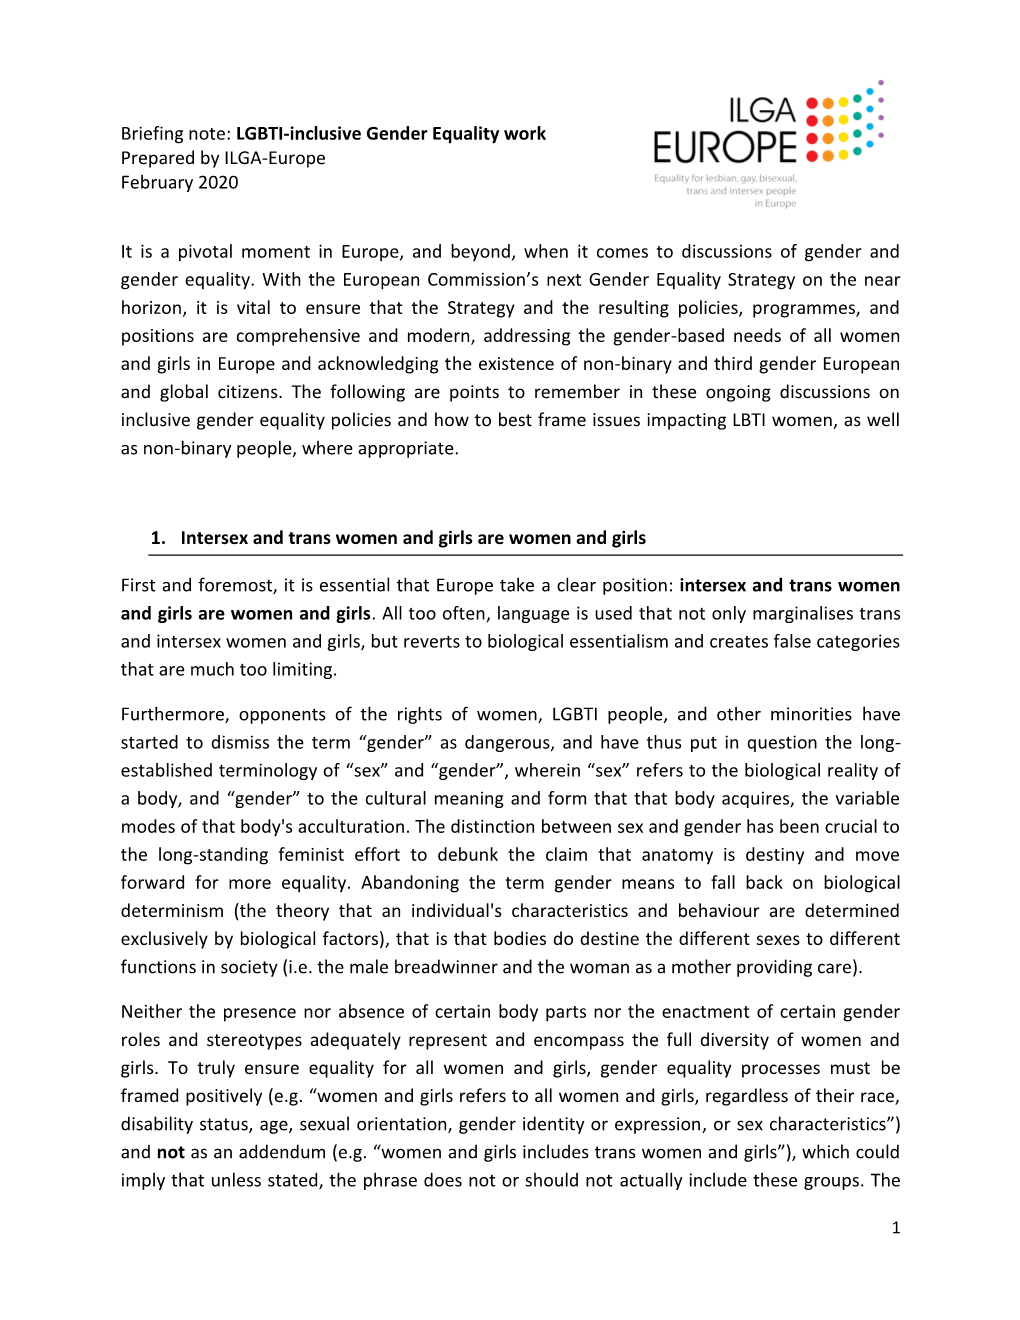 Briefing Note: LGBTI-Inclusive Gender Equality Work Prepared by ILGA-Europe February 2020 It Is a Pivotal Moment in Europe